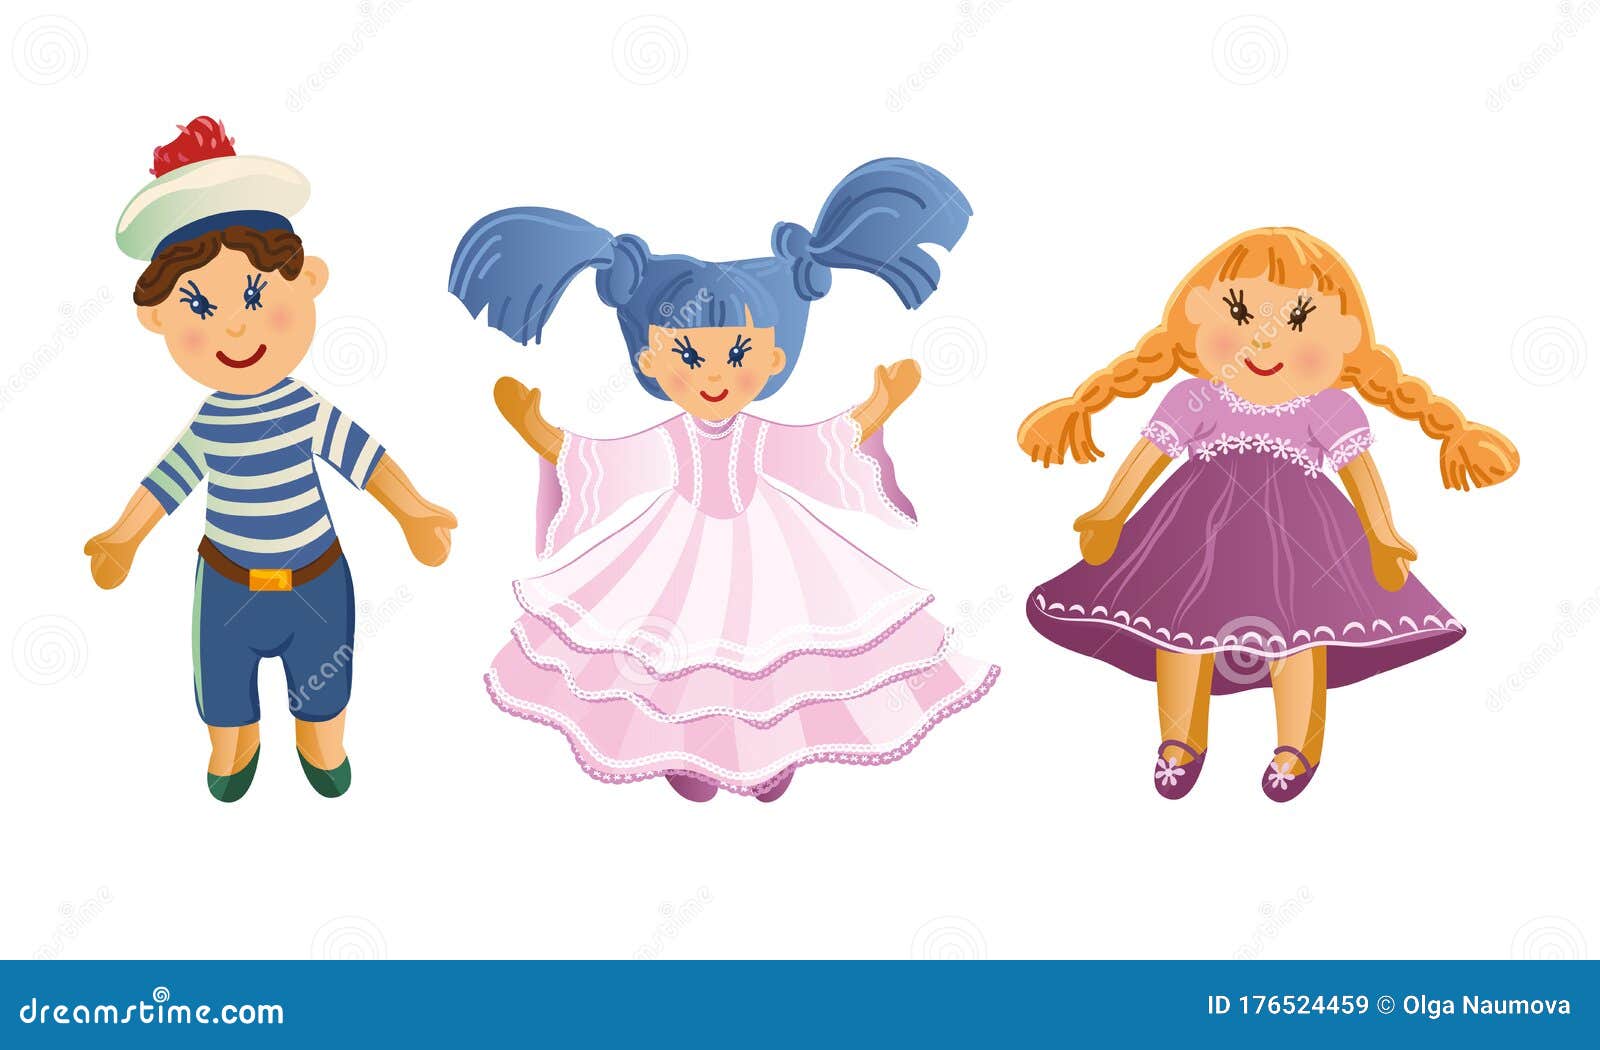 65122 Doll Hair Images Stock Photos  Vectors  Shutterstock